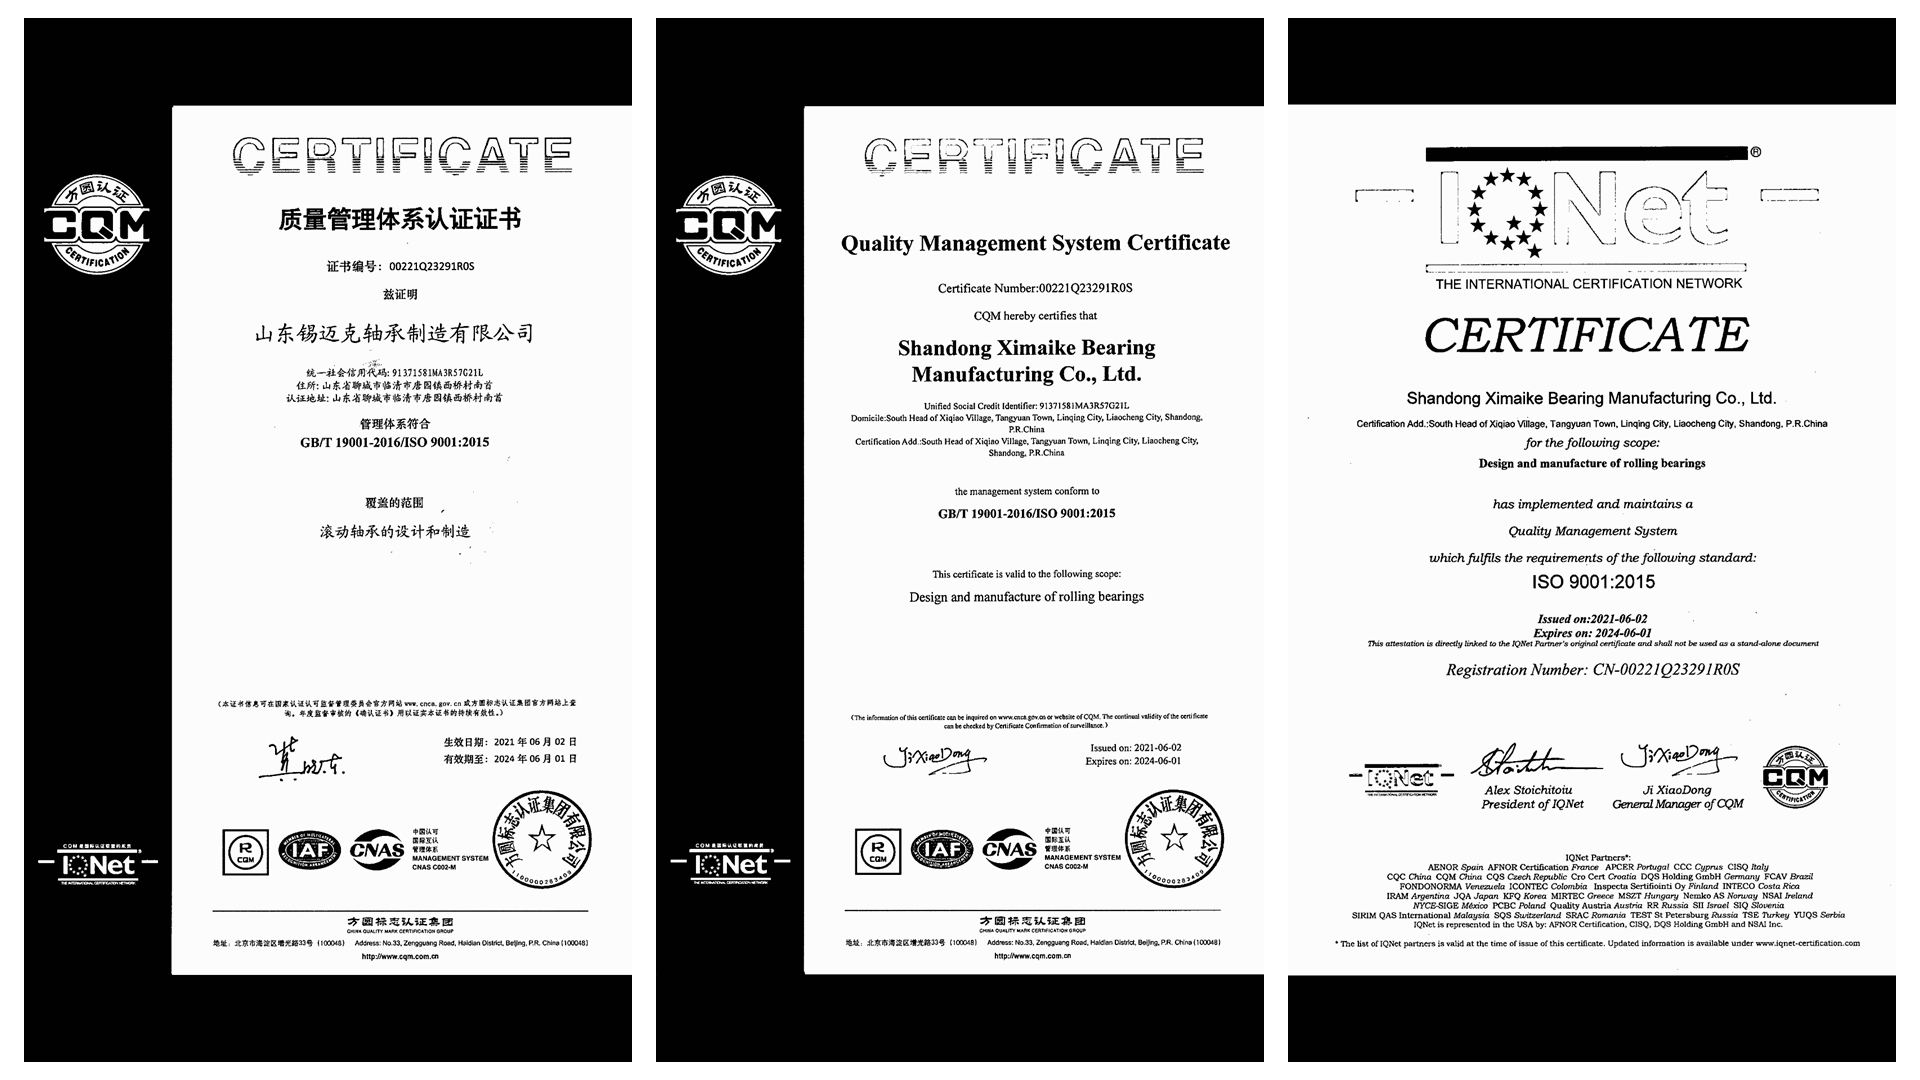  ISO9001:2015 quality management system certification